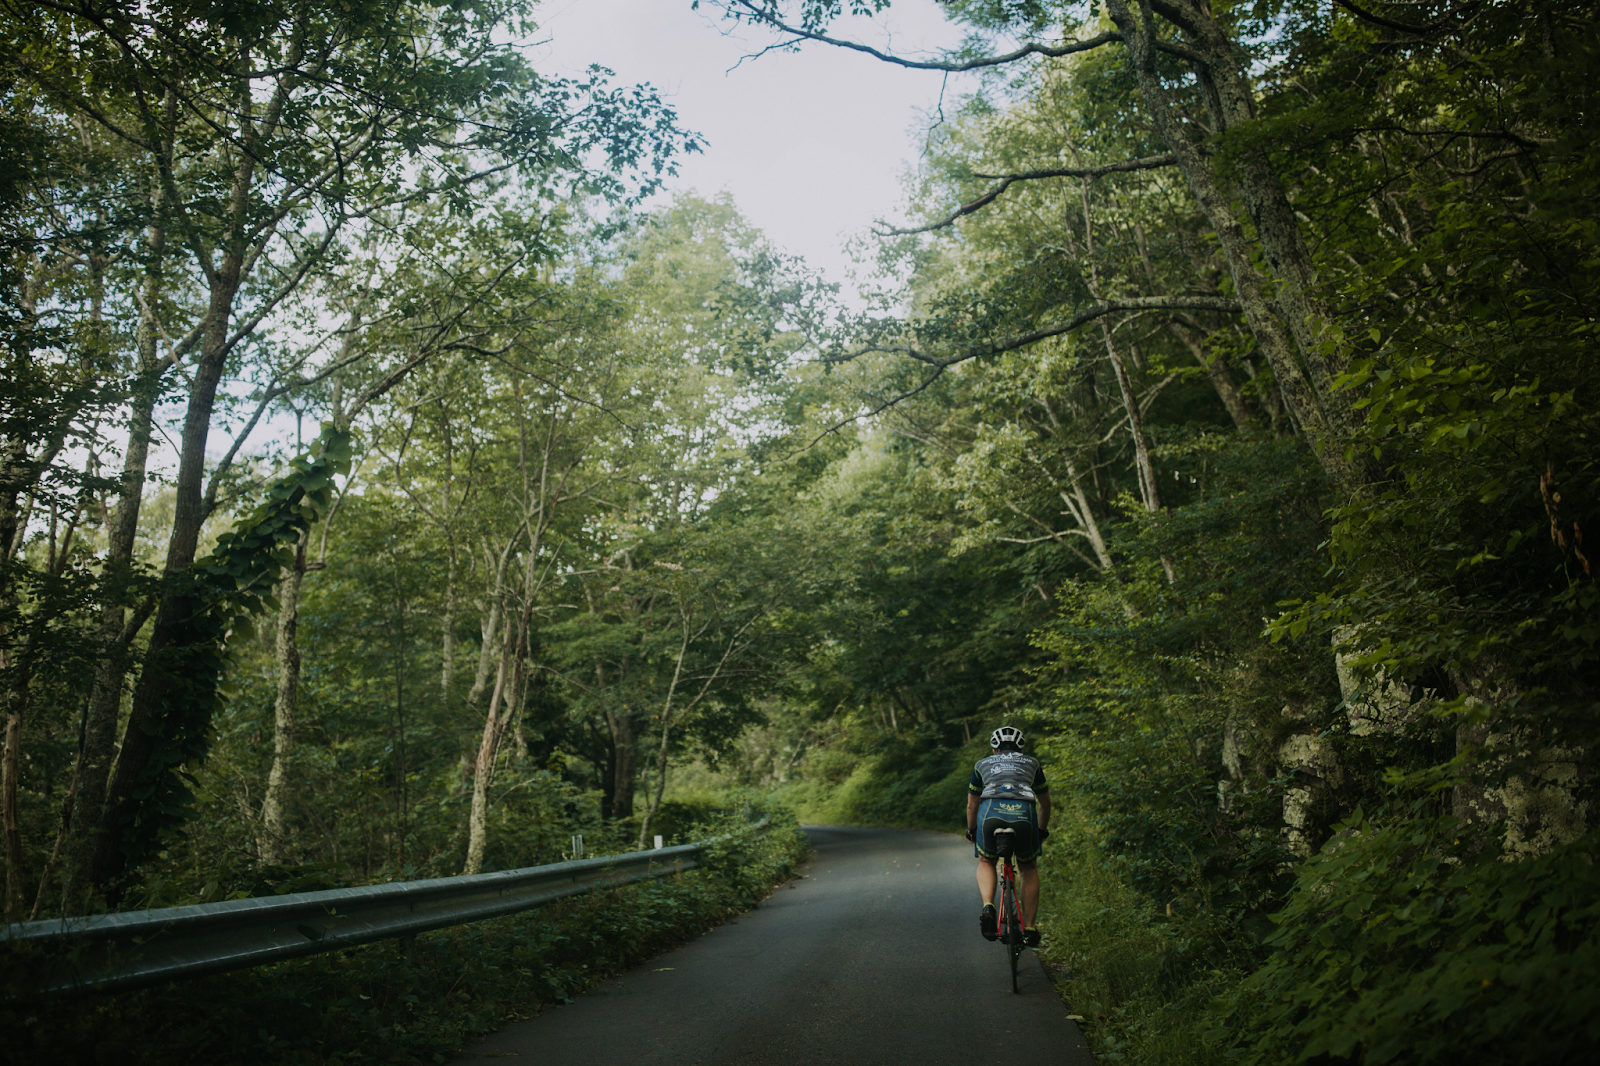 See The Scenery From The Saddle Bike The Shenandoah Valley